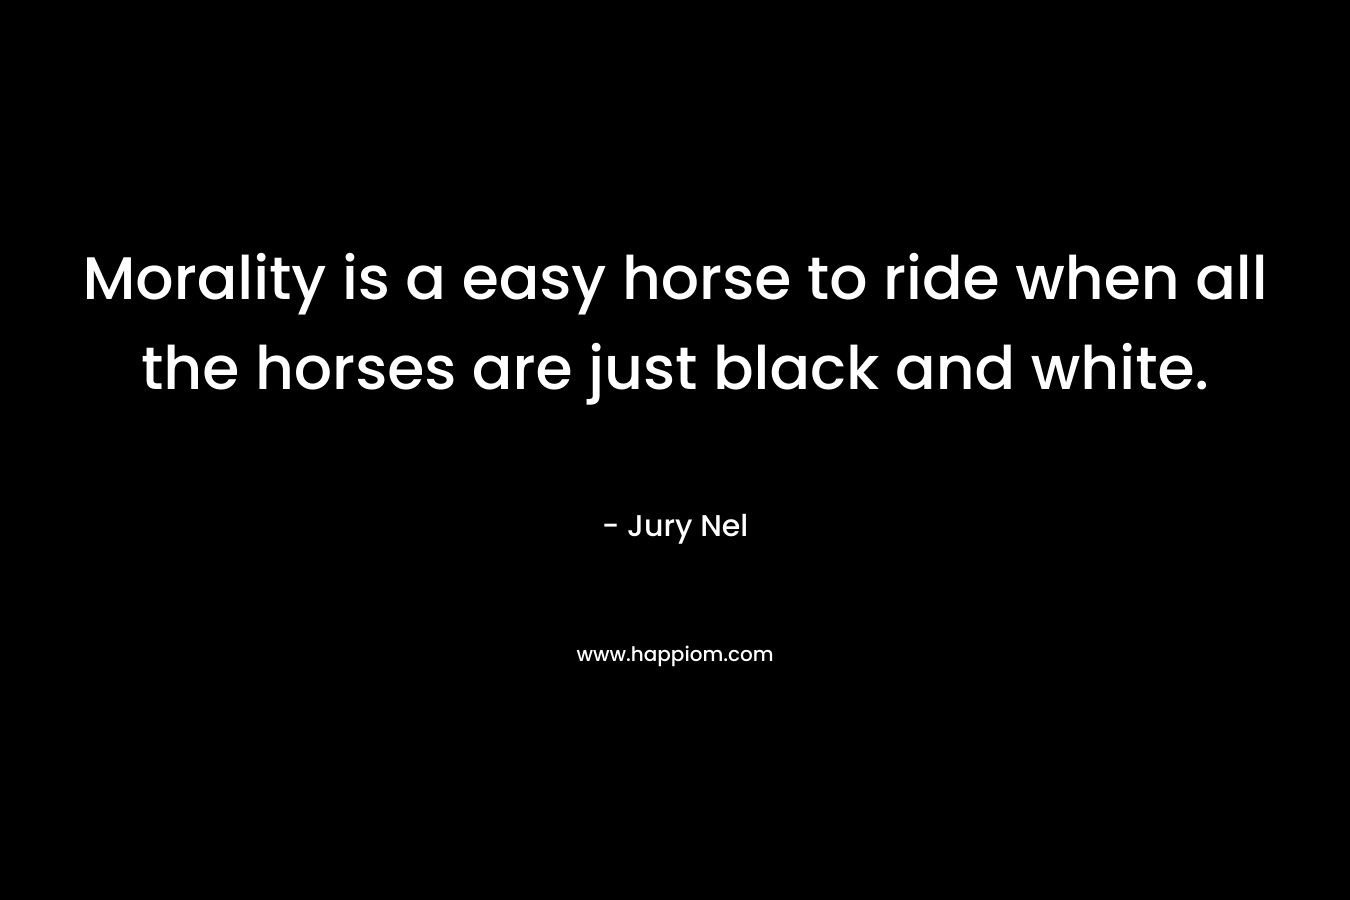 Morality is a easy horse to ride when all the horses are just black and white.